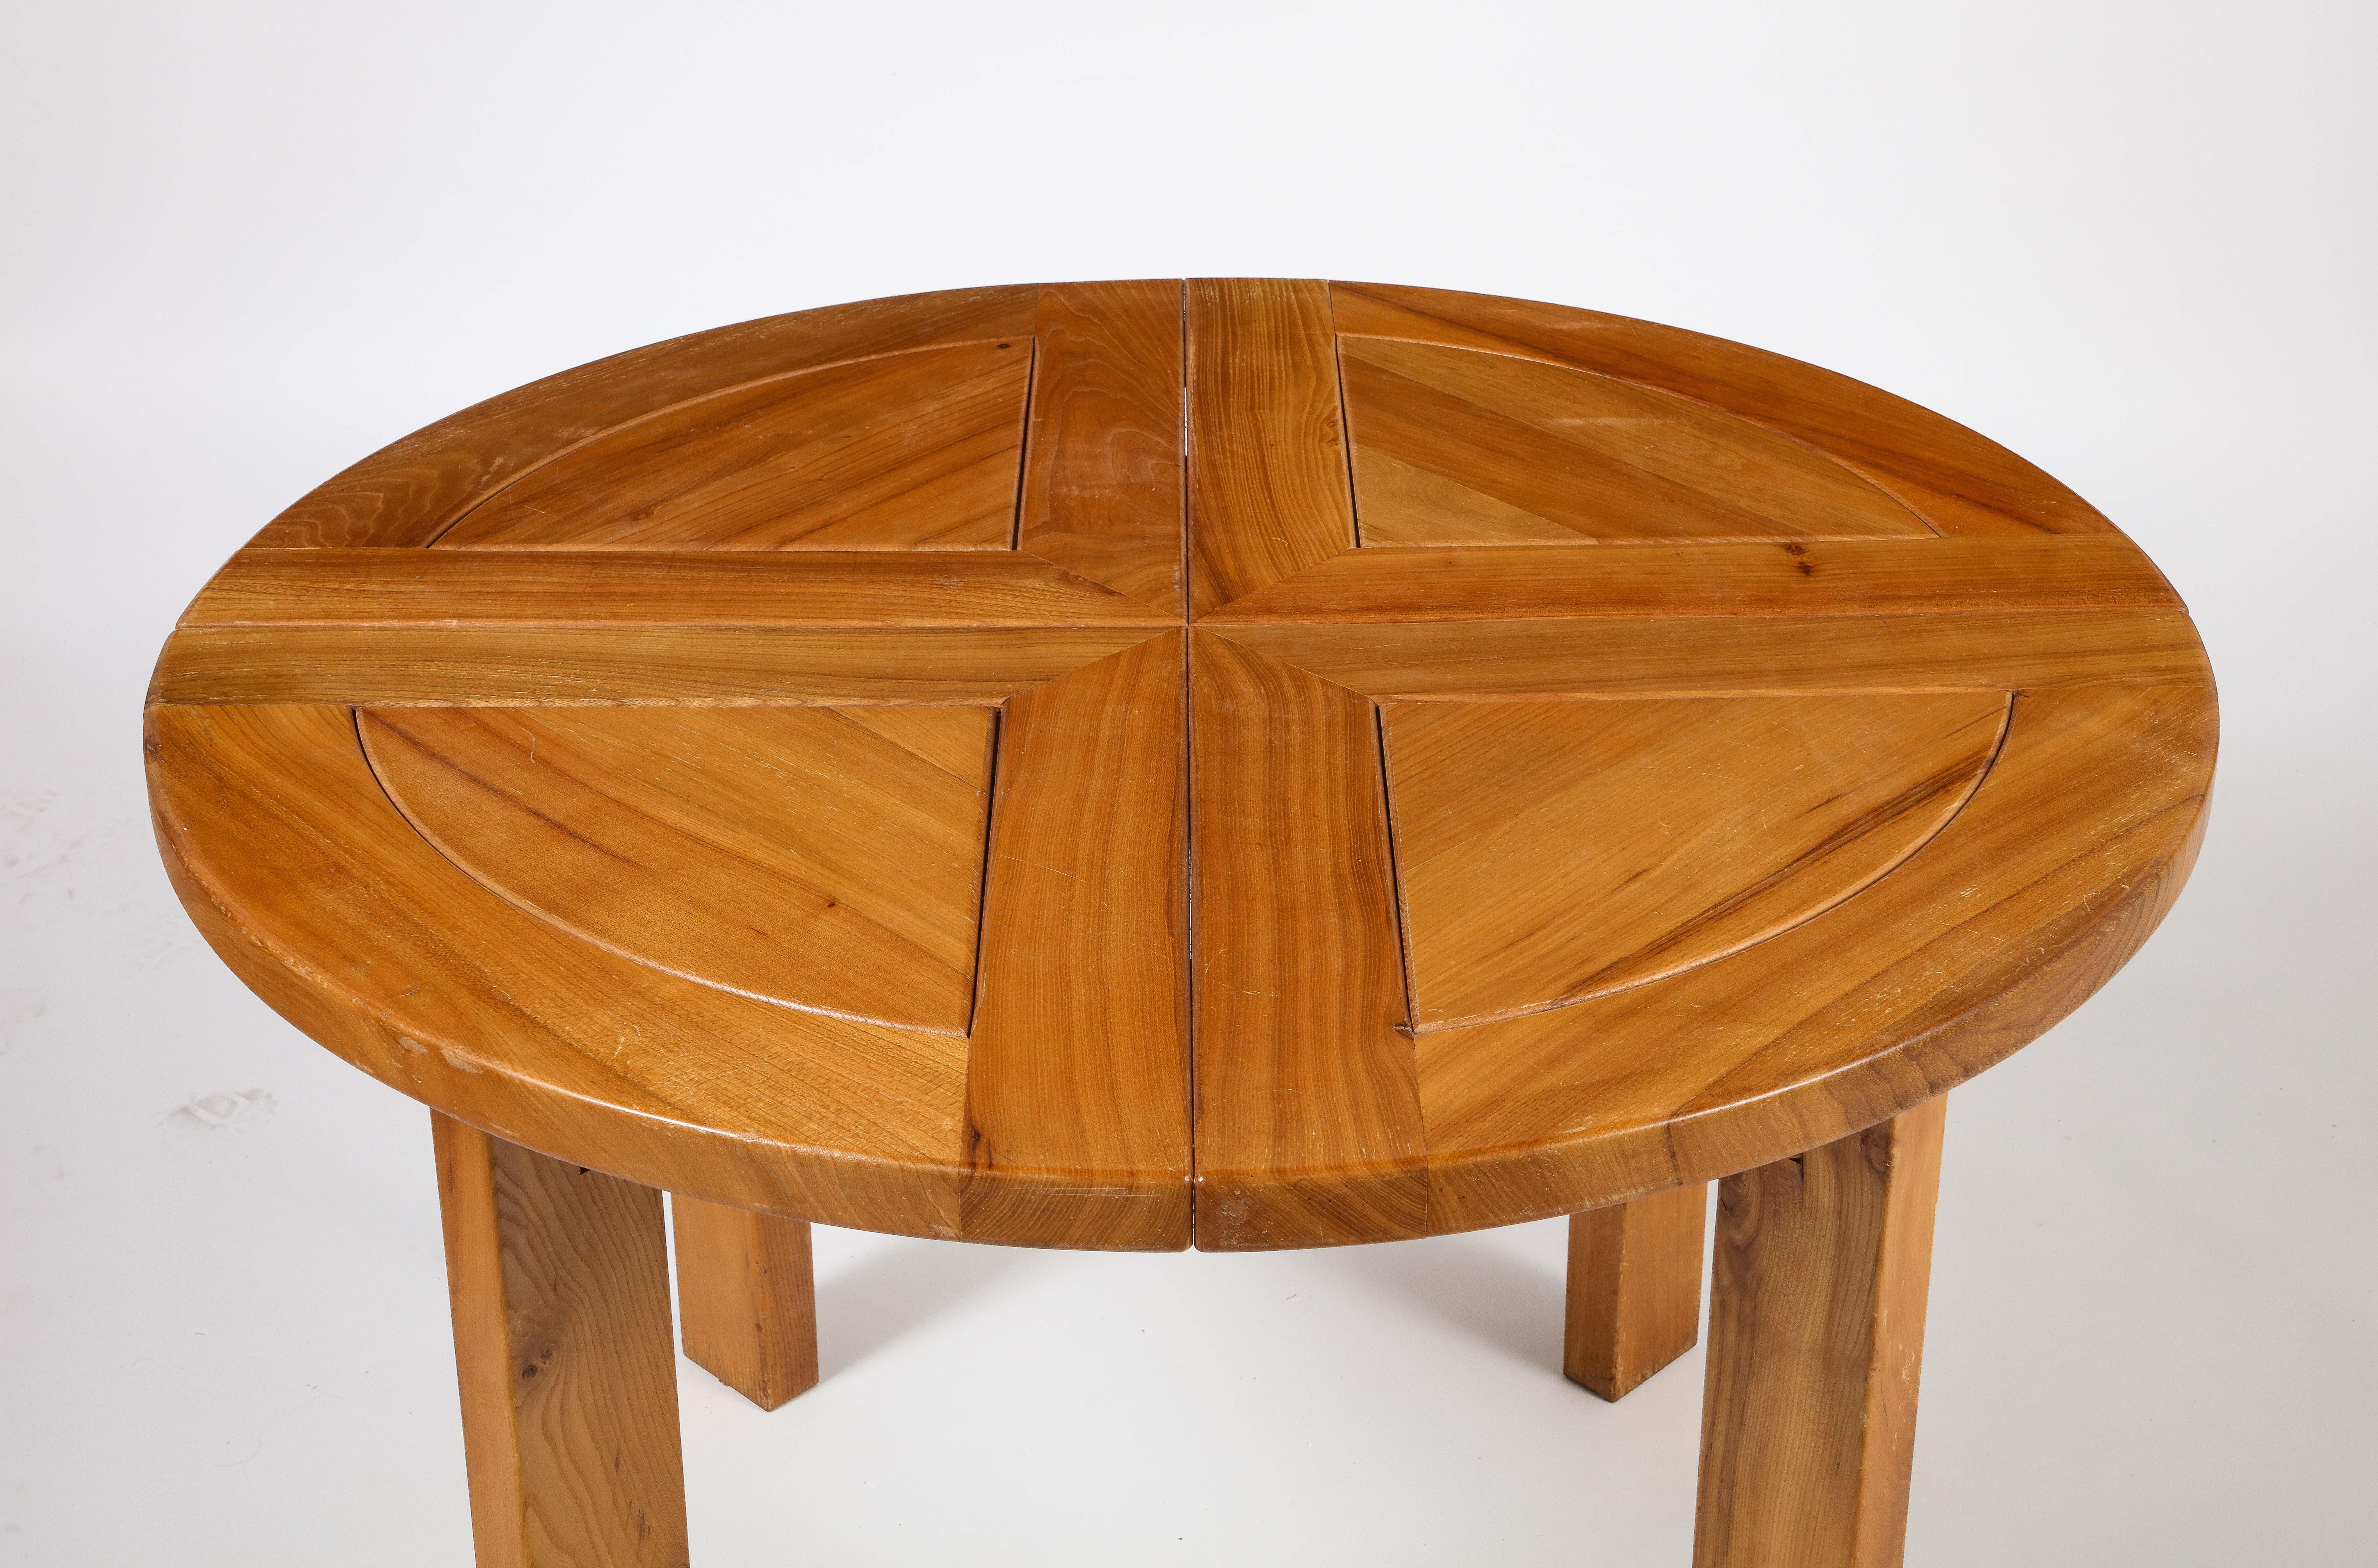 A stunning Maison Regain dining table executed in a rich and beautifully colored elm wood. The table is sturdy and combines a simplified yet complex design with solid construction details which characterize the works by Maison Regain. 
With